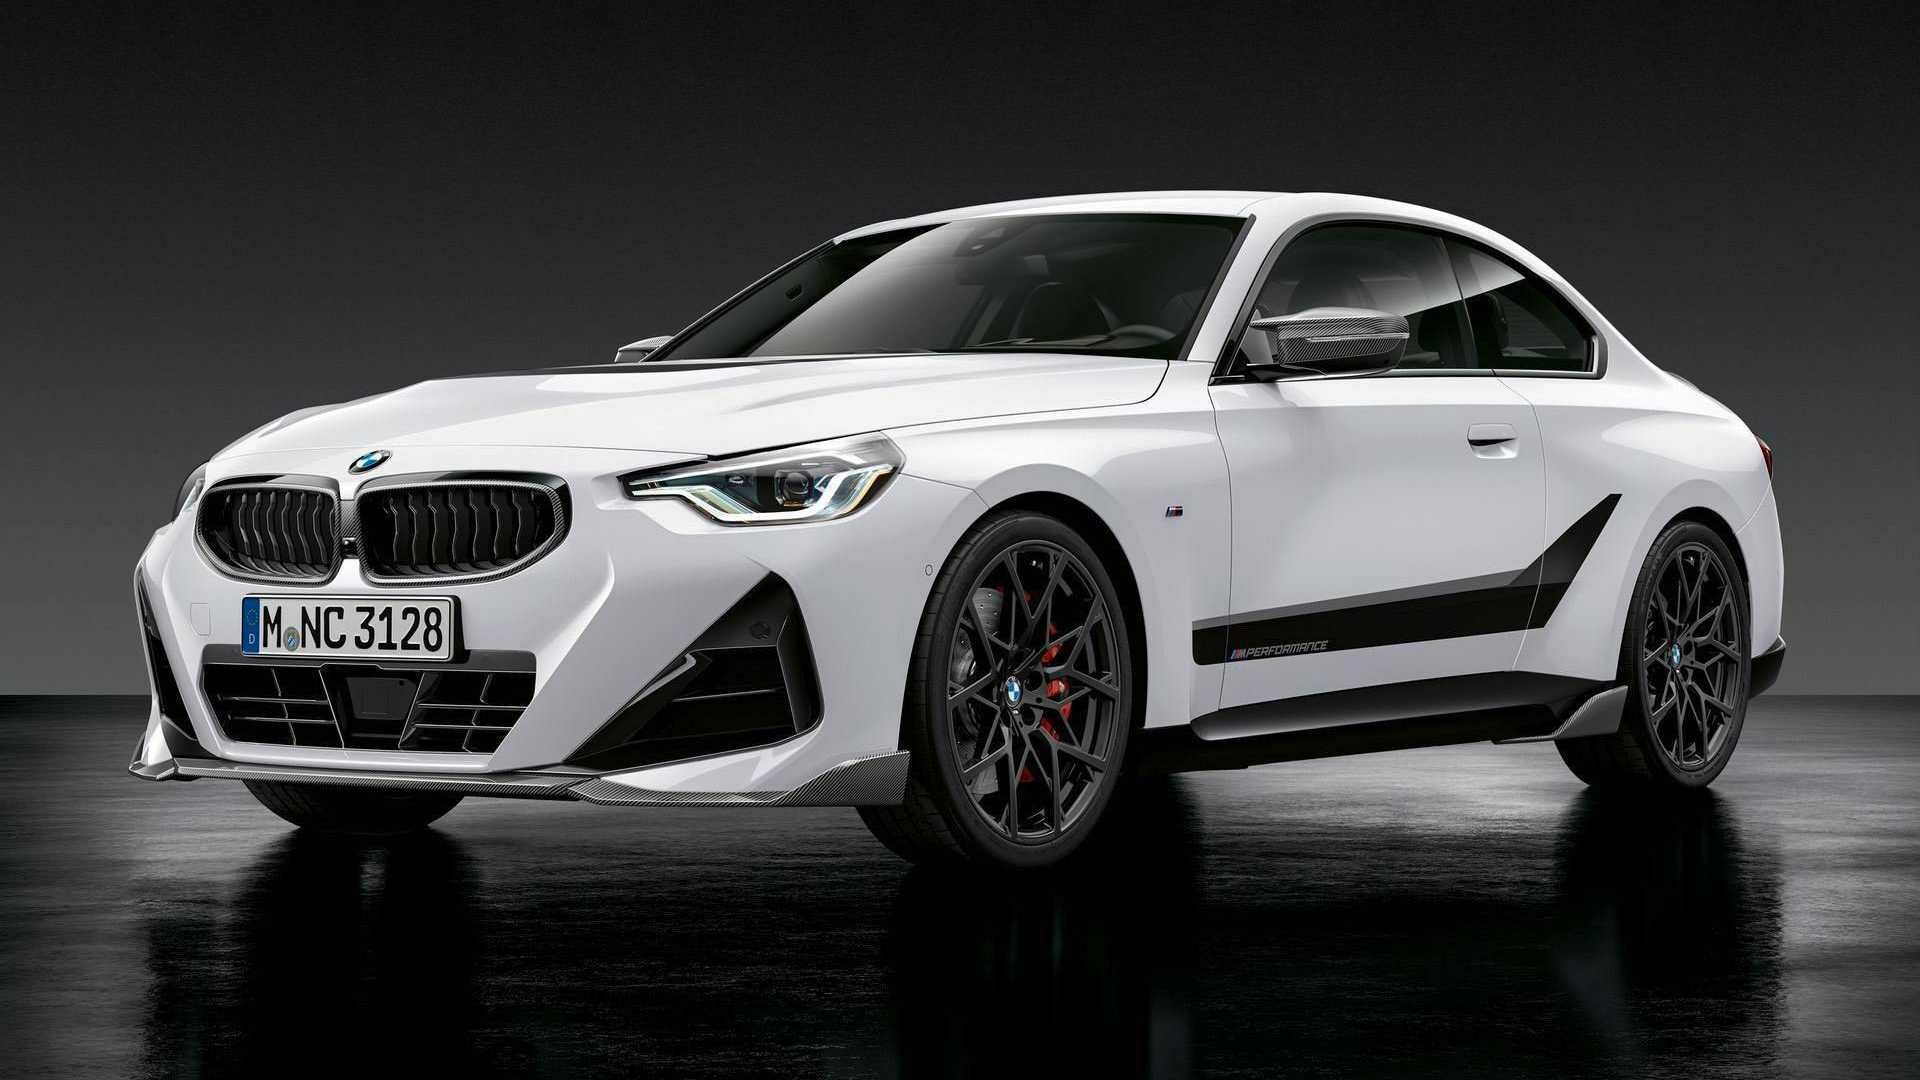 BMW 2 Series: Coupe, Based on a rear-wheel drive platform. 1920x1080 Full HD Background.